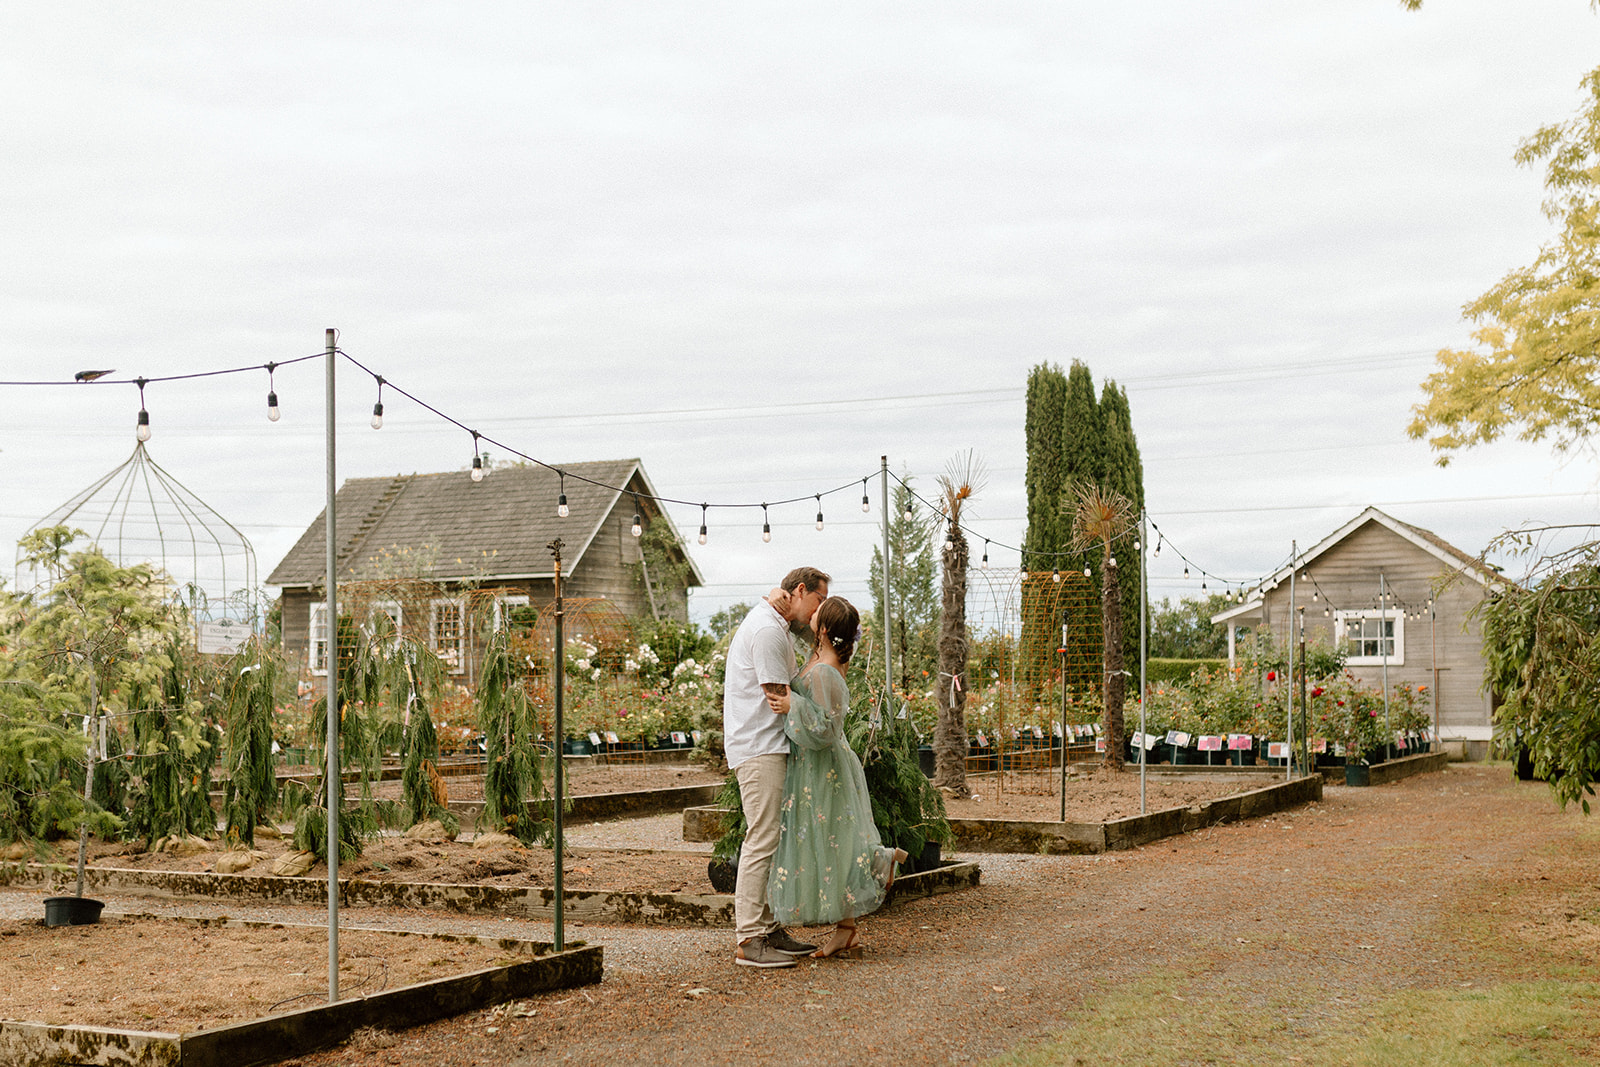 Garden wedding in at Christiansons Nursery with Elegant and simple wedding decor